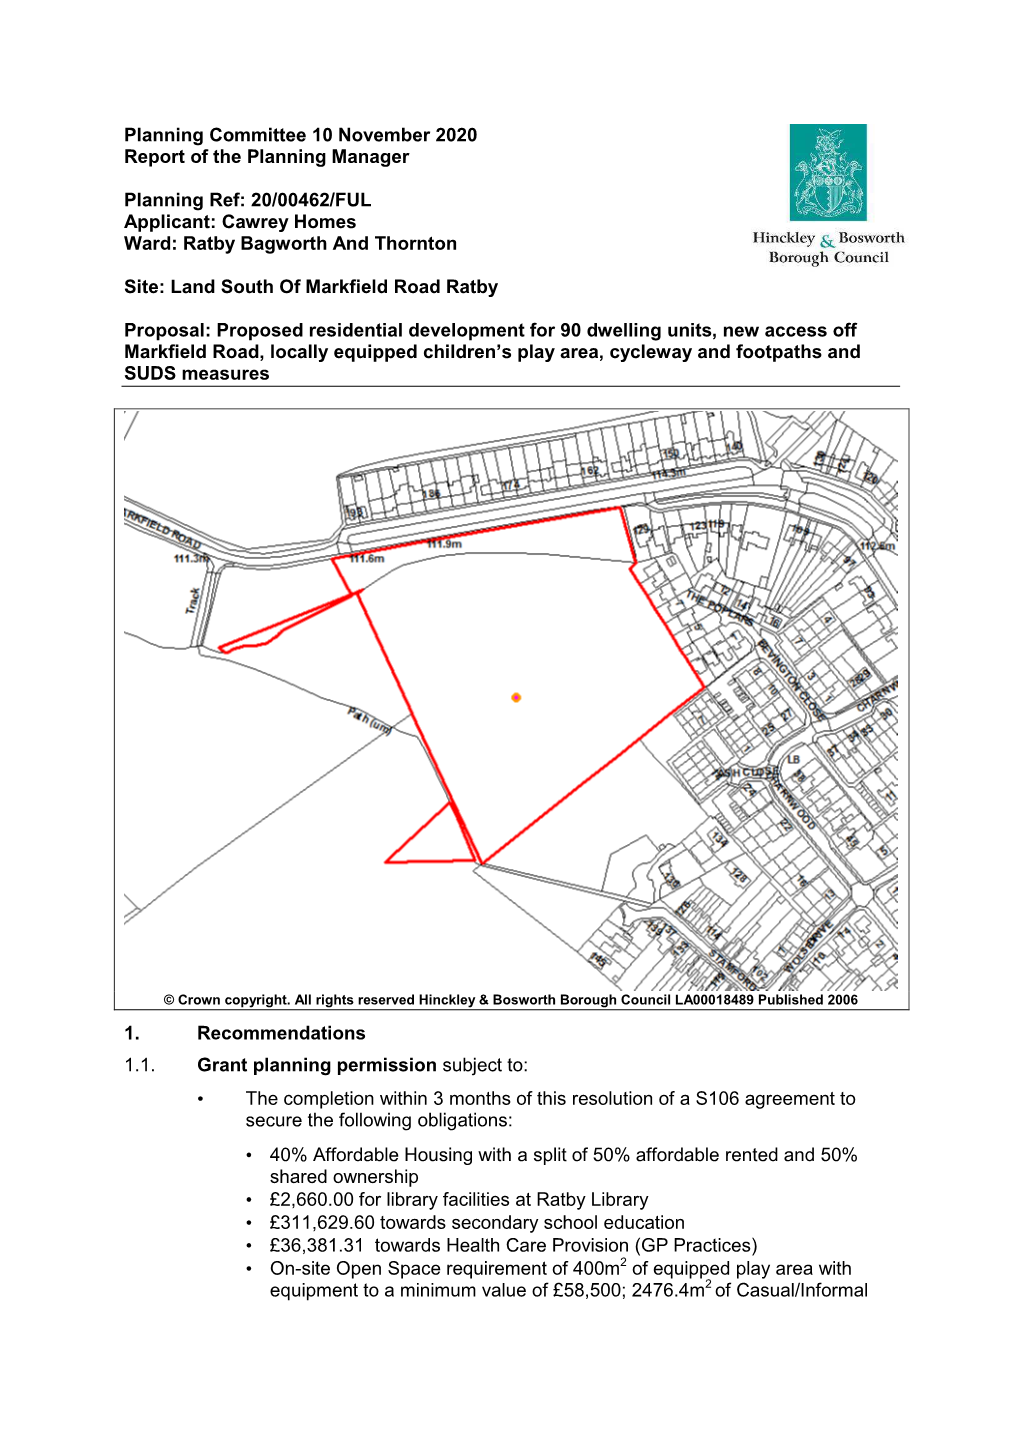 20/00462/FUL Applicant: Cawrey Homes Ward: Ratby Bagworth and Thornton